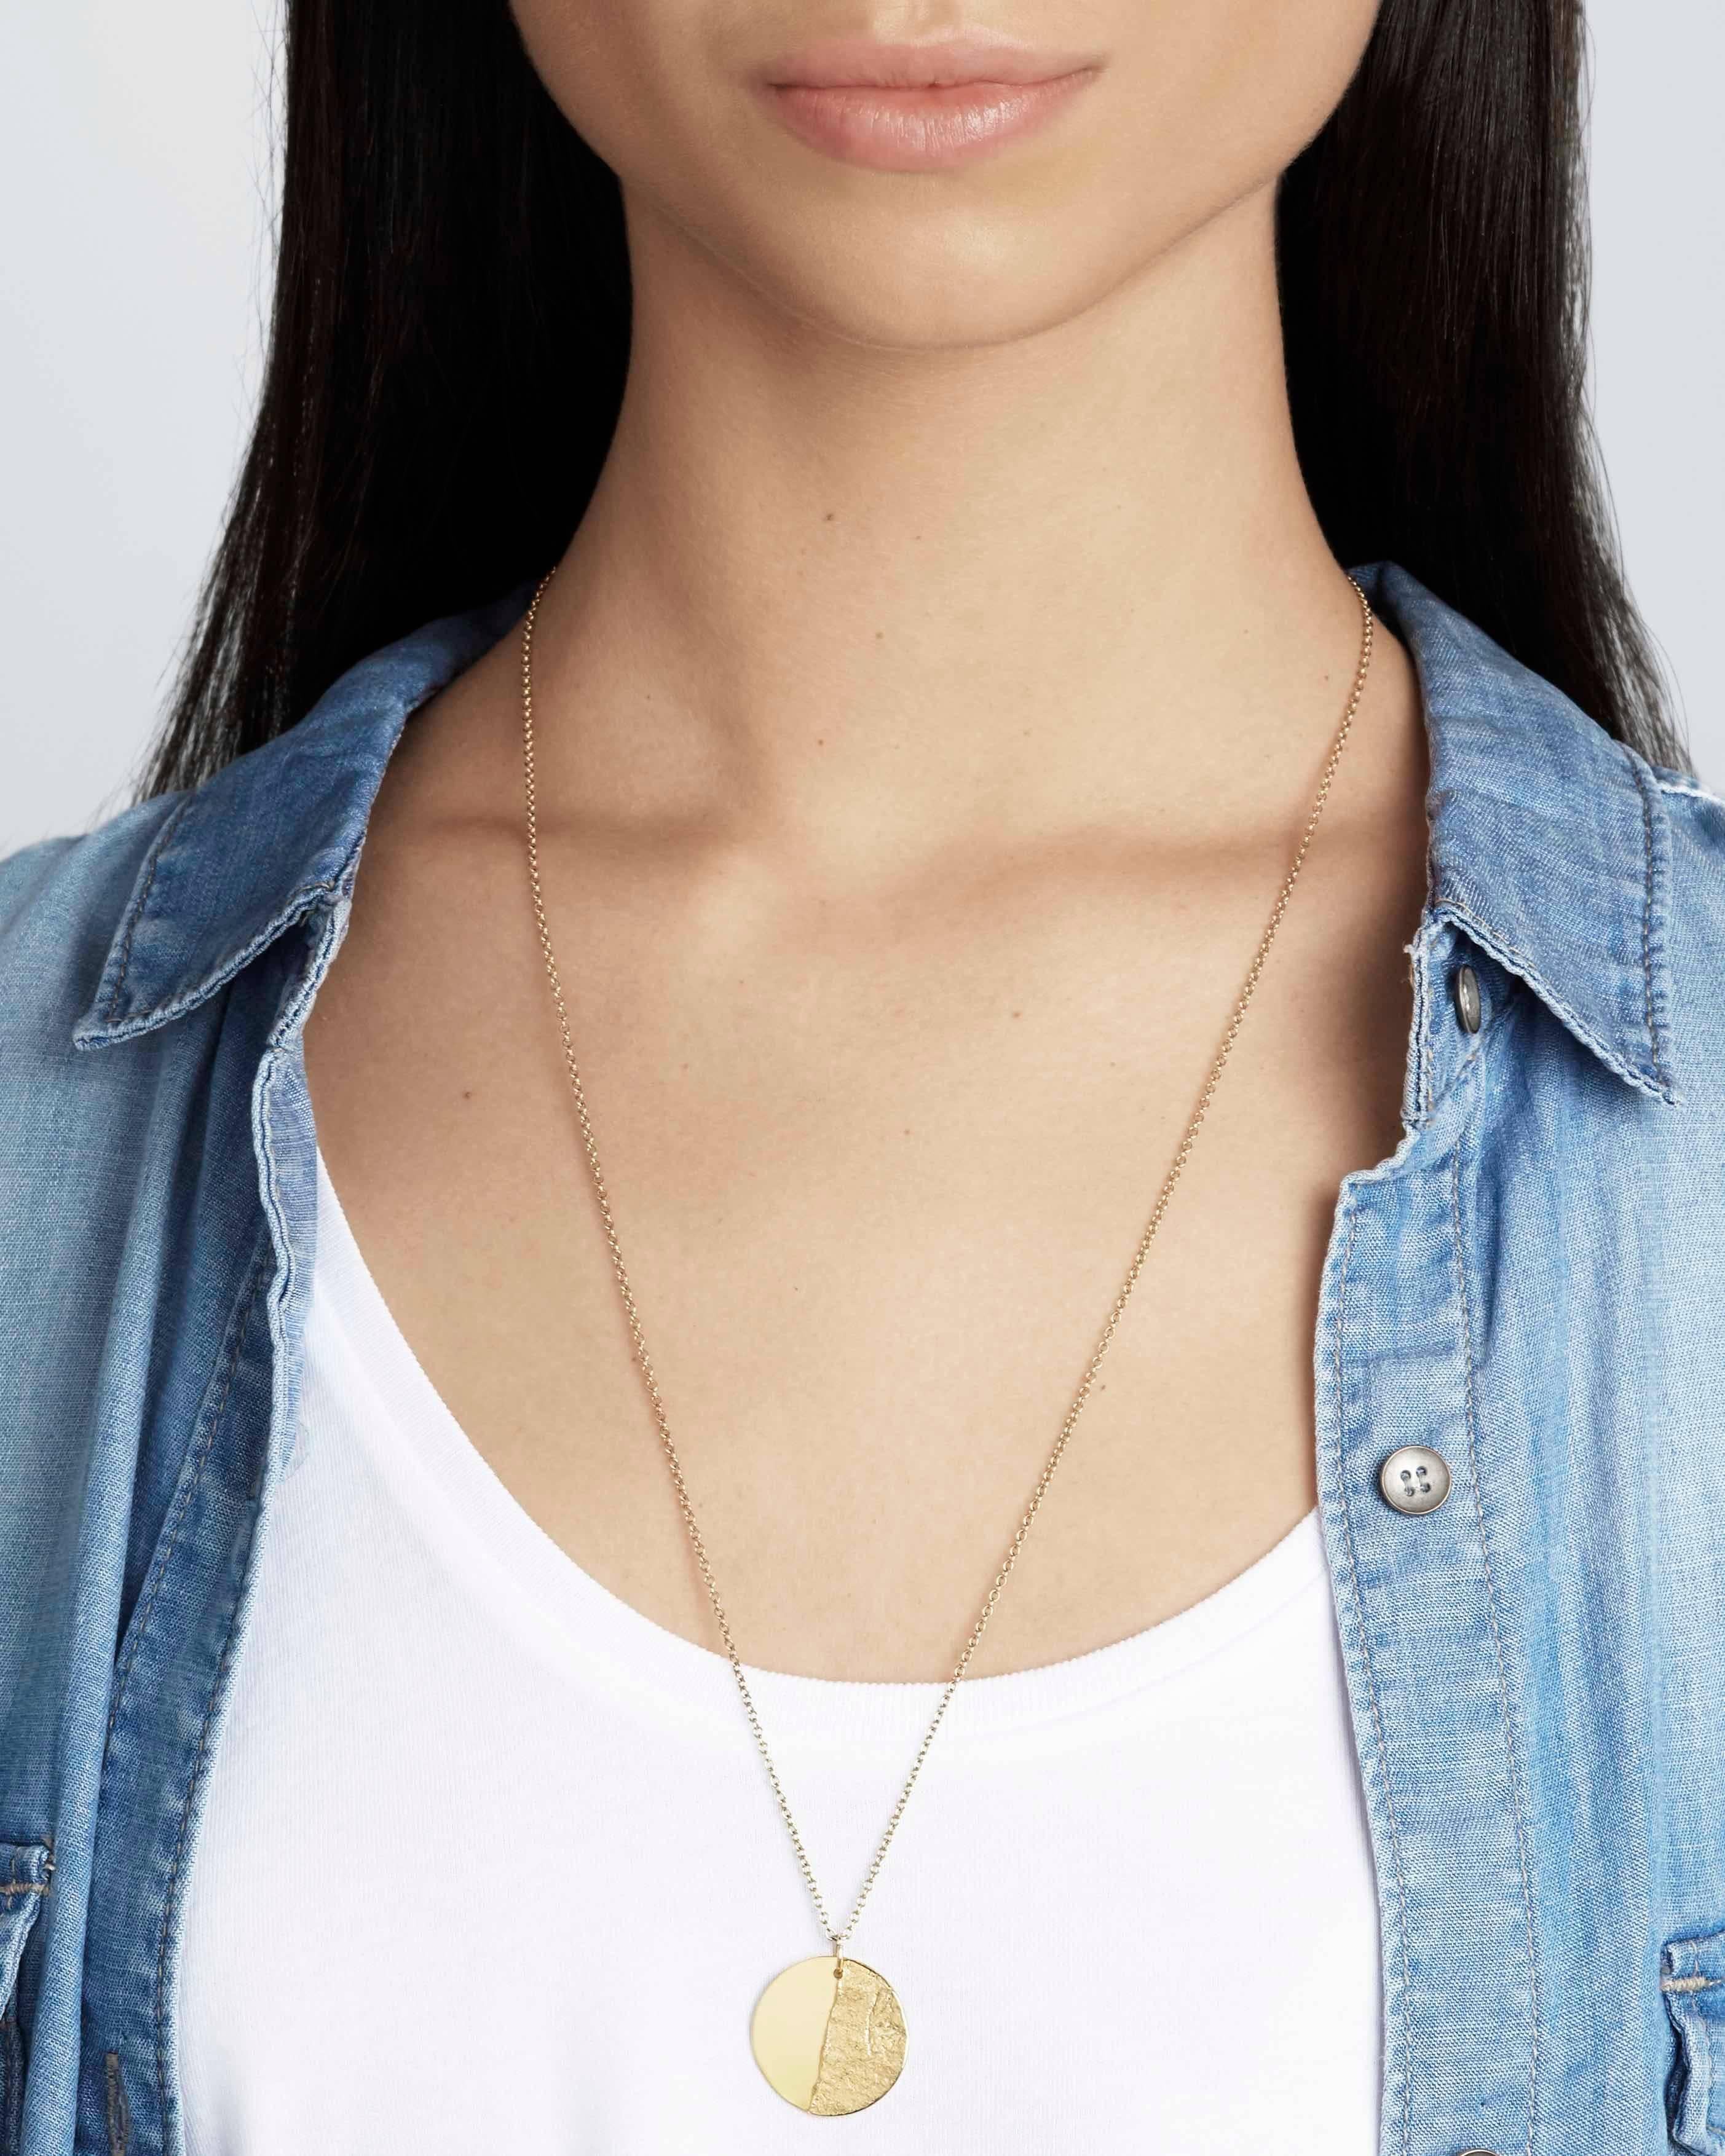 This classic disc pendant necklace crafted in solid 18-carat gold features our signature Paper texture combined with a rustic high-polish finish for the best of both worlds.  The pendant is 22mm in diameter and comes on a 20-inch chain in solid